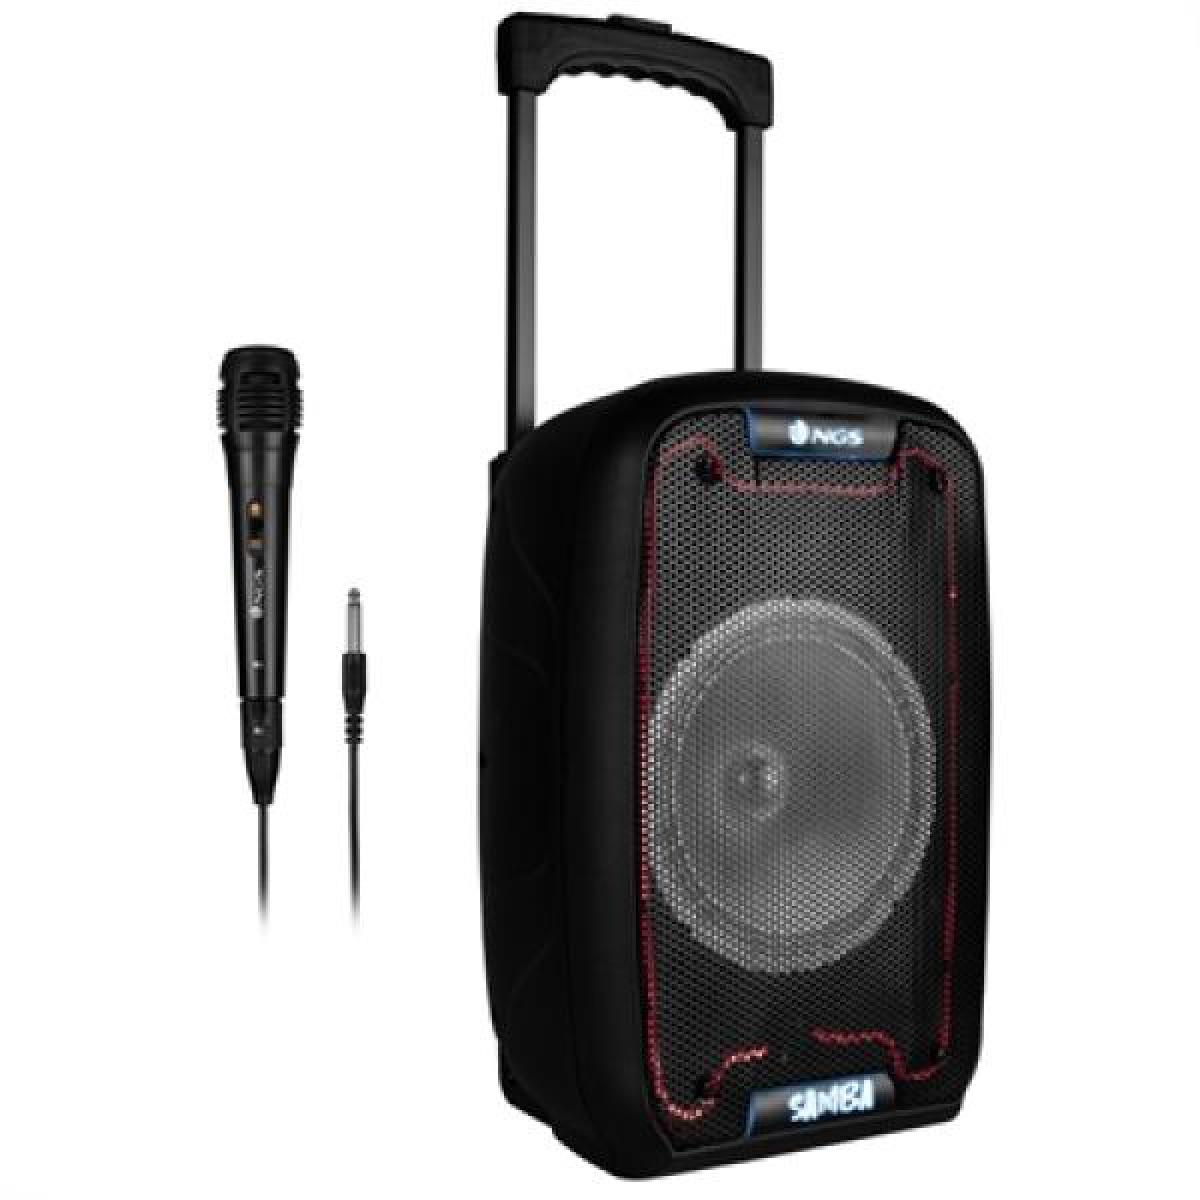 Ngs - 30W BUILT IN BATTERY TROLLEY SPEAKER - BT/USB/TF/A - Drone connecté